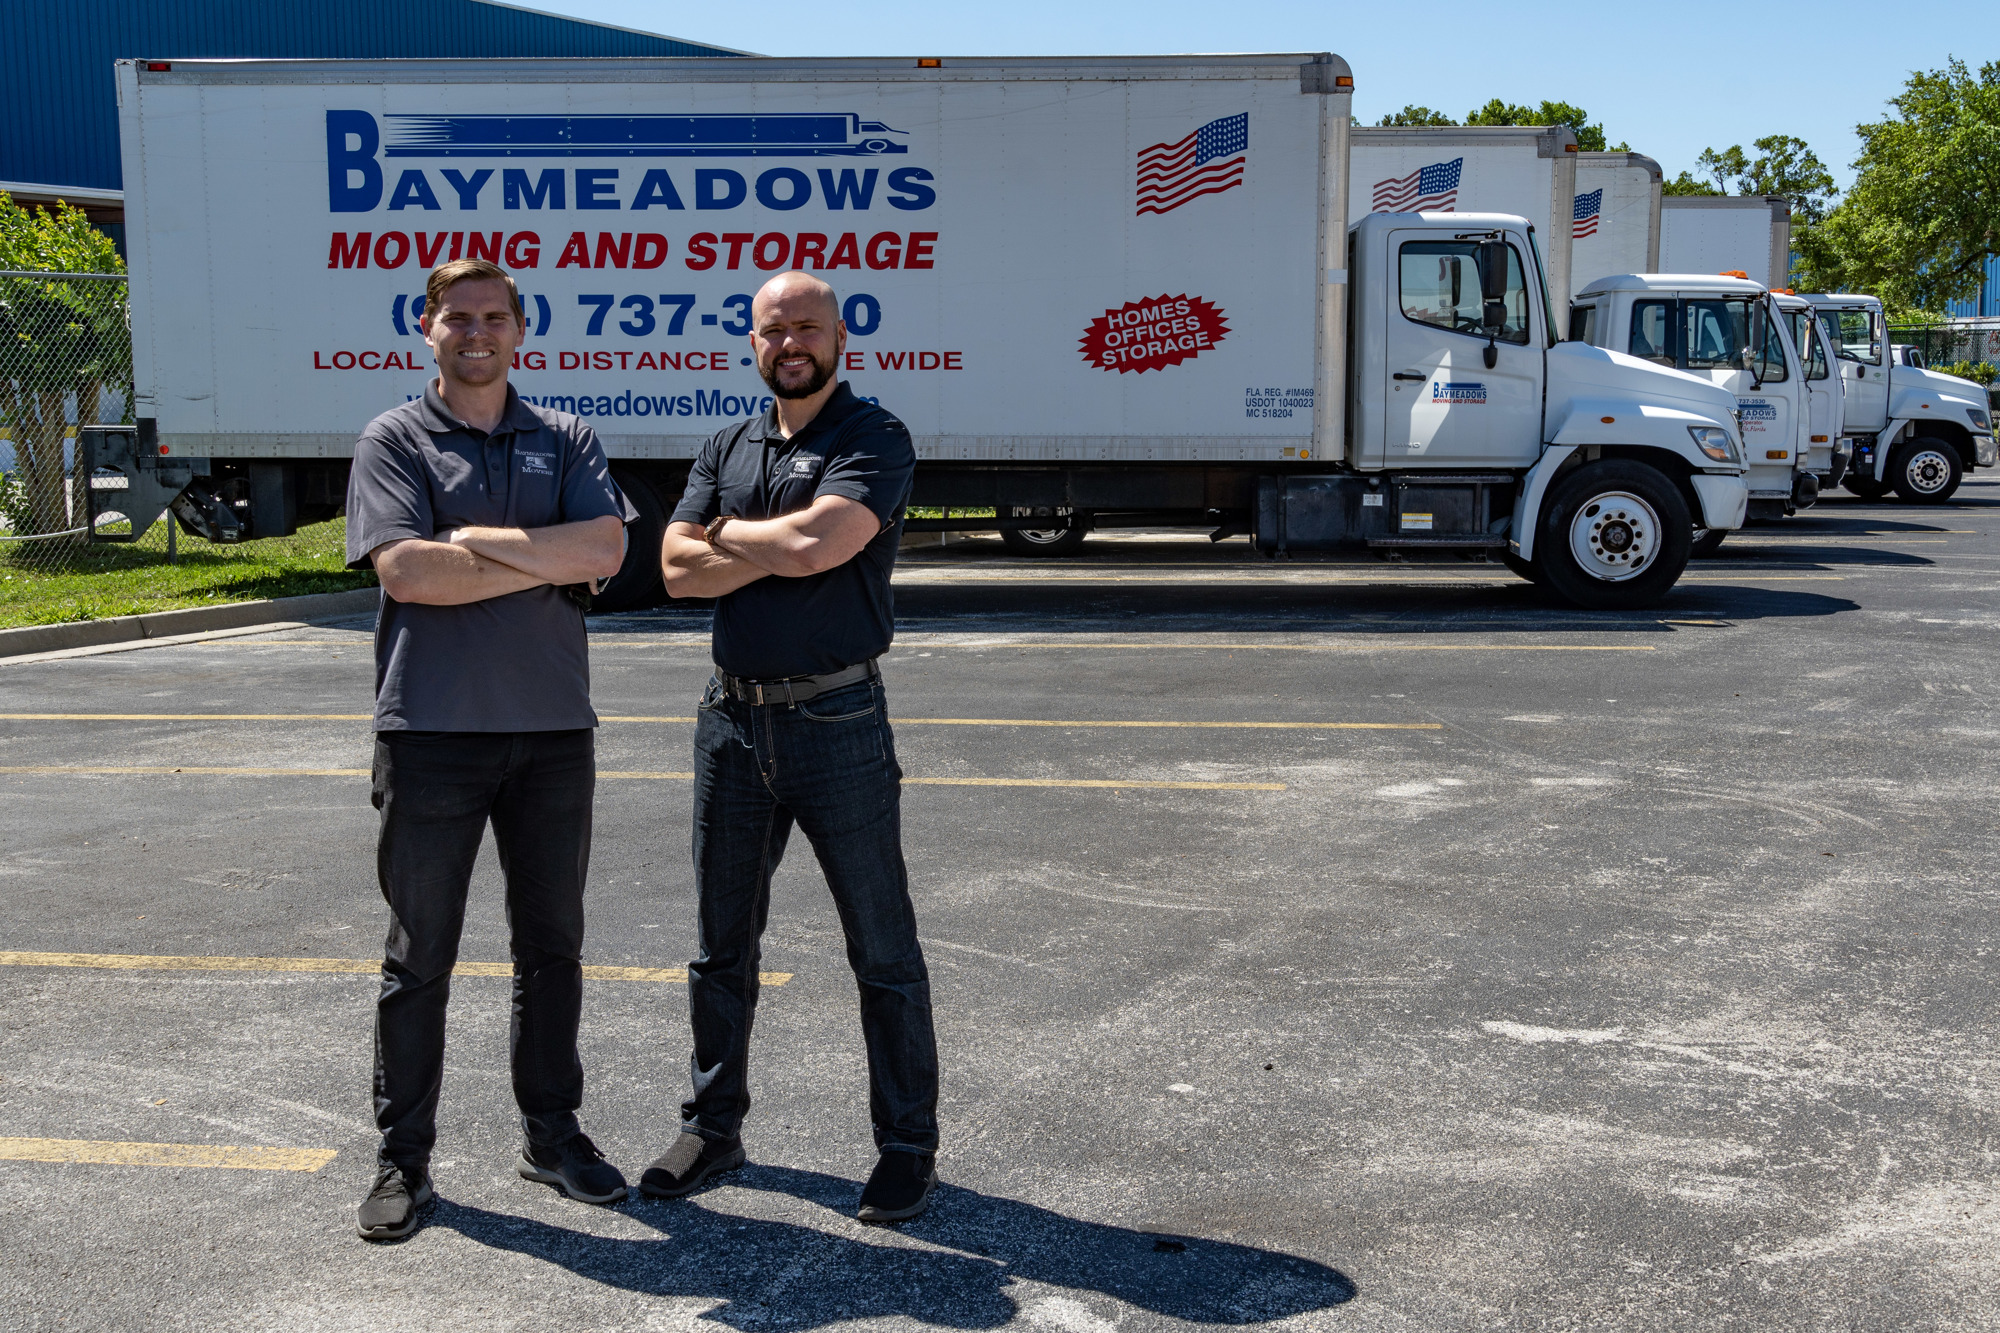 Baymeadows Moving and Storage handles shipping, receiving, storage and delivery for companies like Comcast and UF Health. (Photo by Jason Pratt)